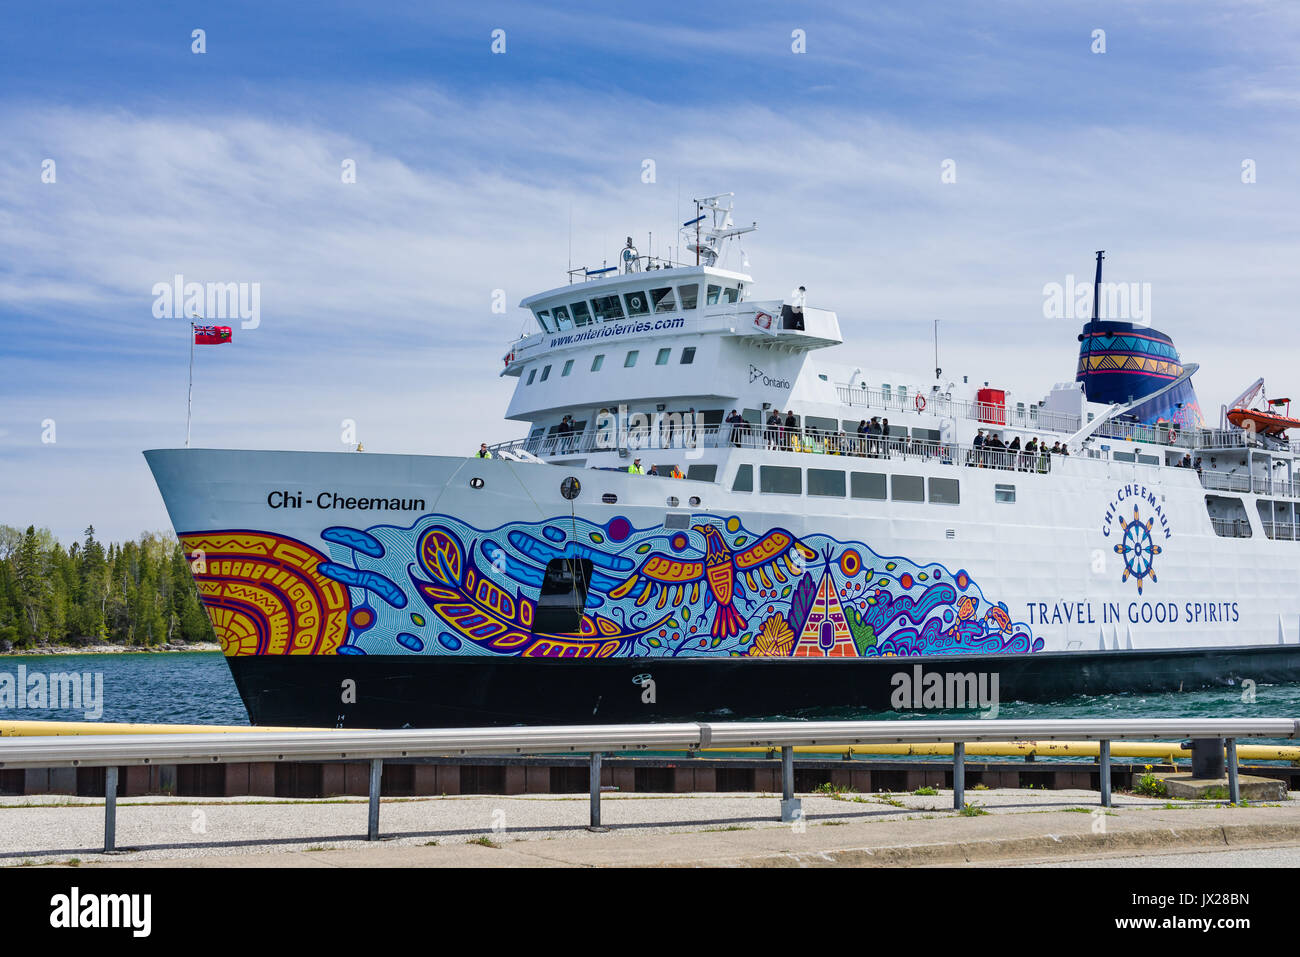 Chi-Cheemaun Ferry Arriving At South Baymouth Ferry Terminal, Ontario, Canada Stock Photo